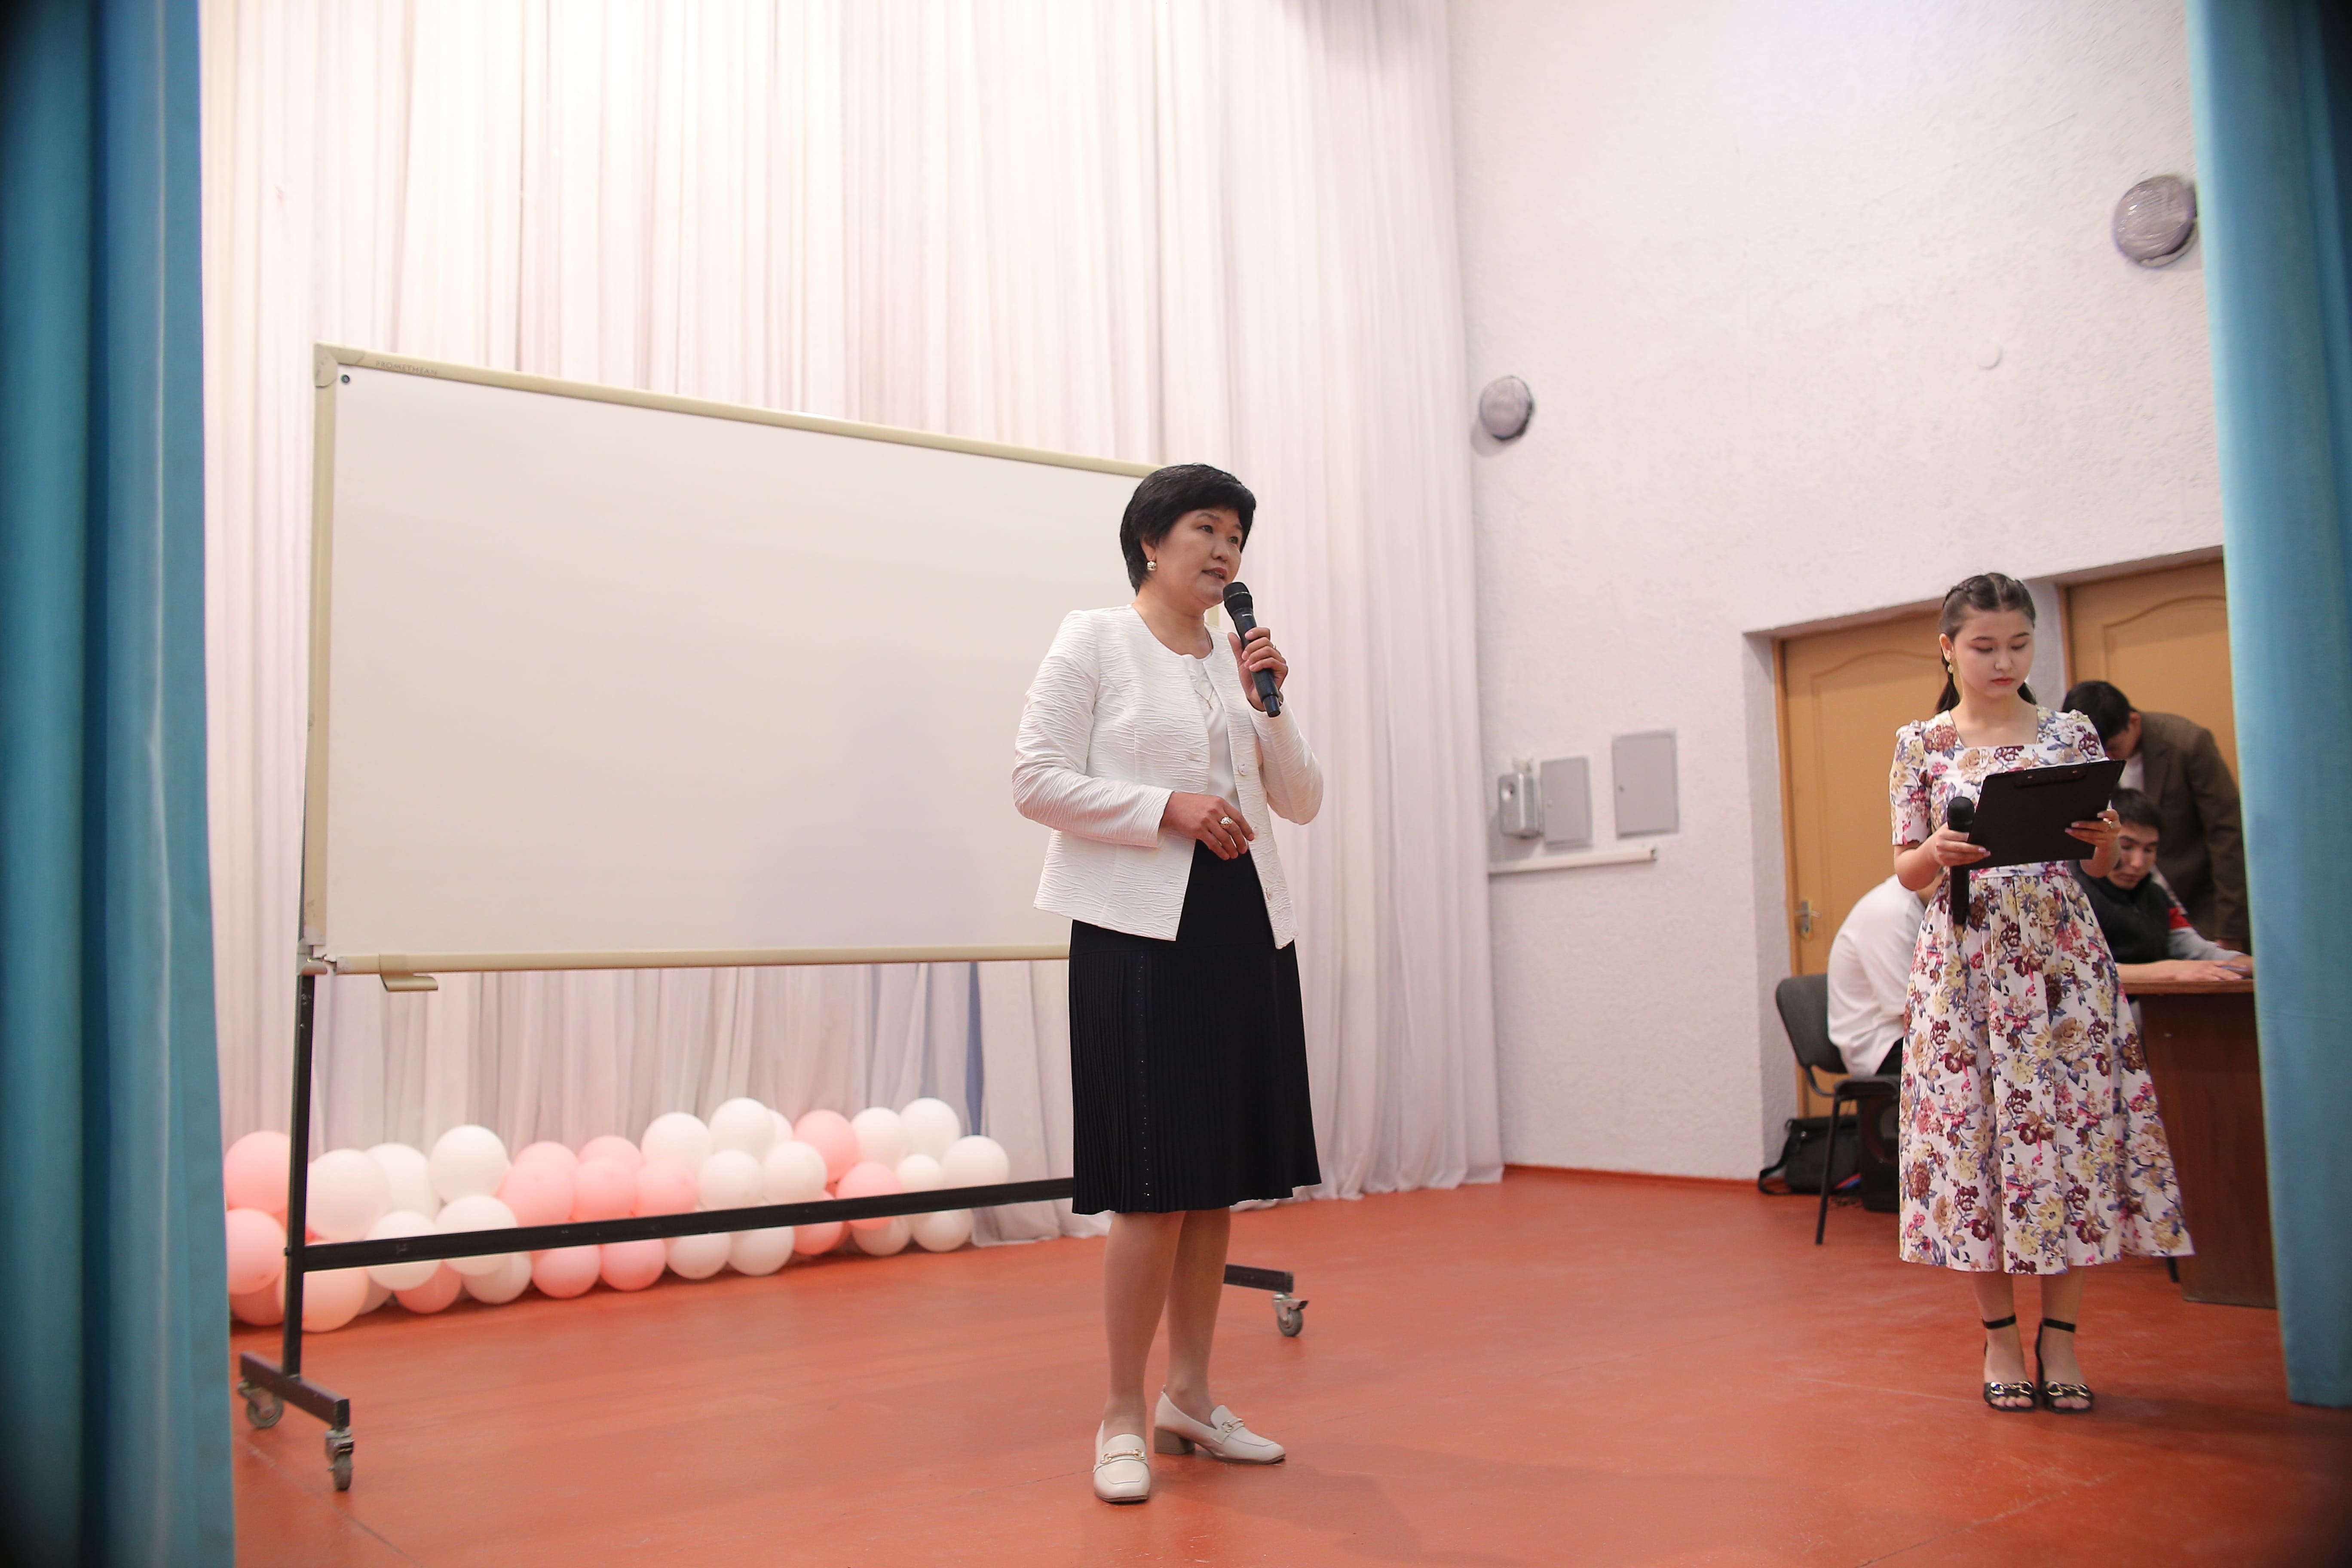 «An open Day» was provided at the Agrarian Faculty of the South Kazakhstan university named after M.Auezov